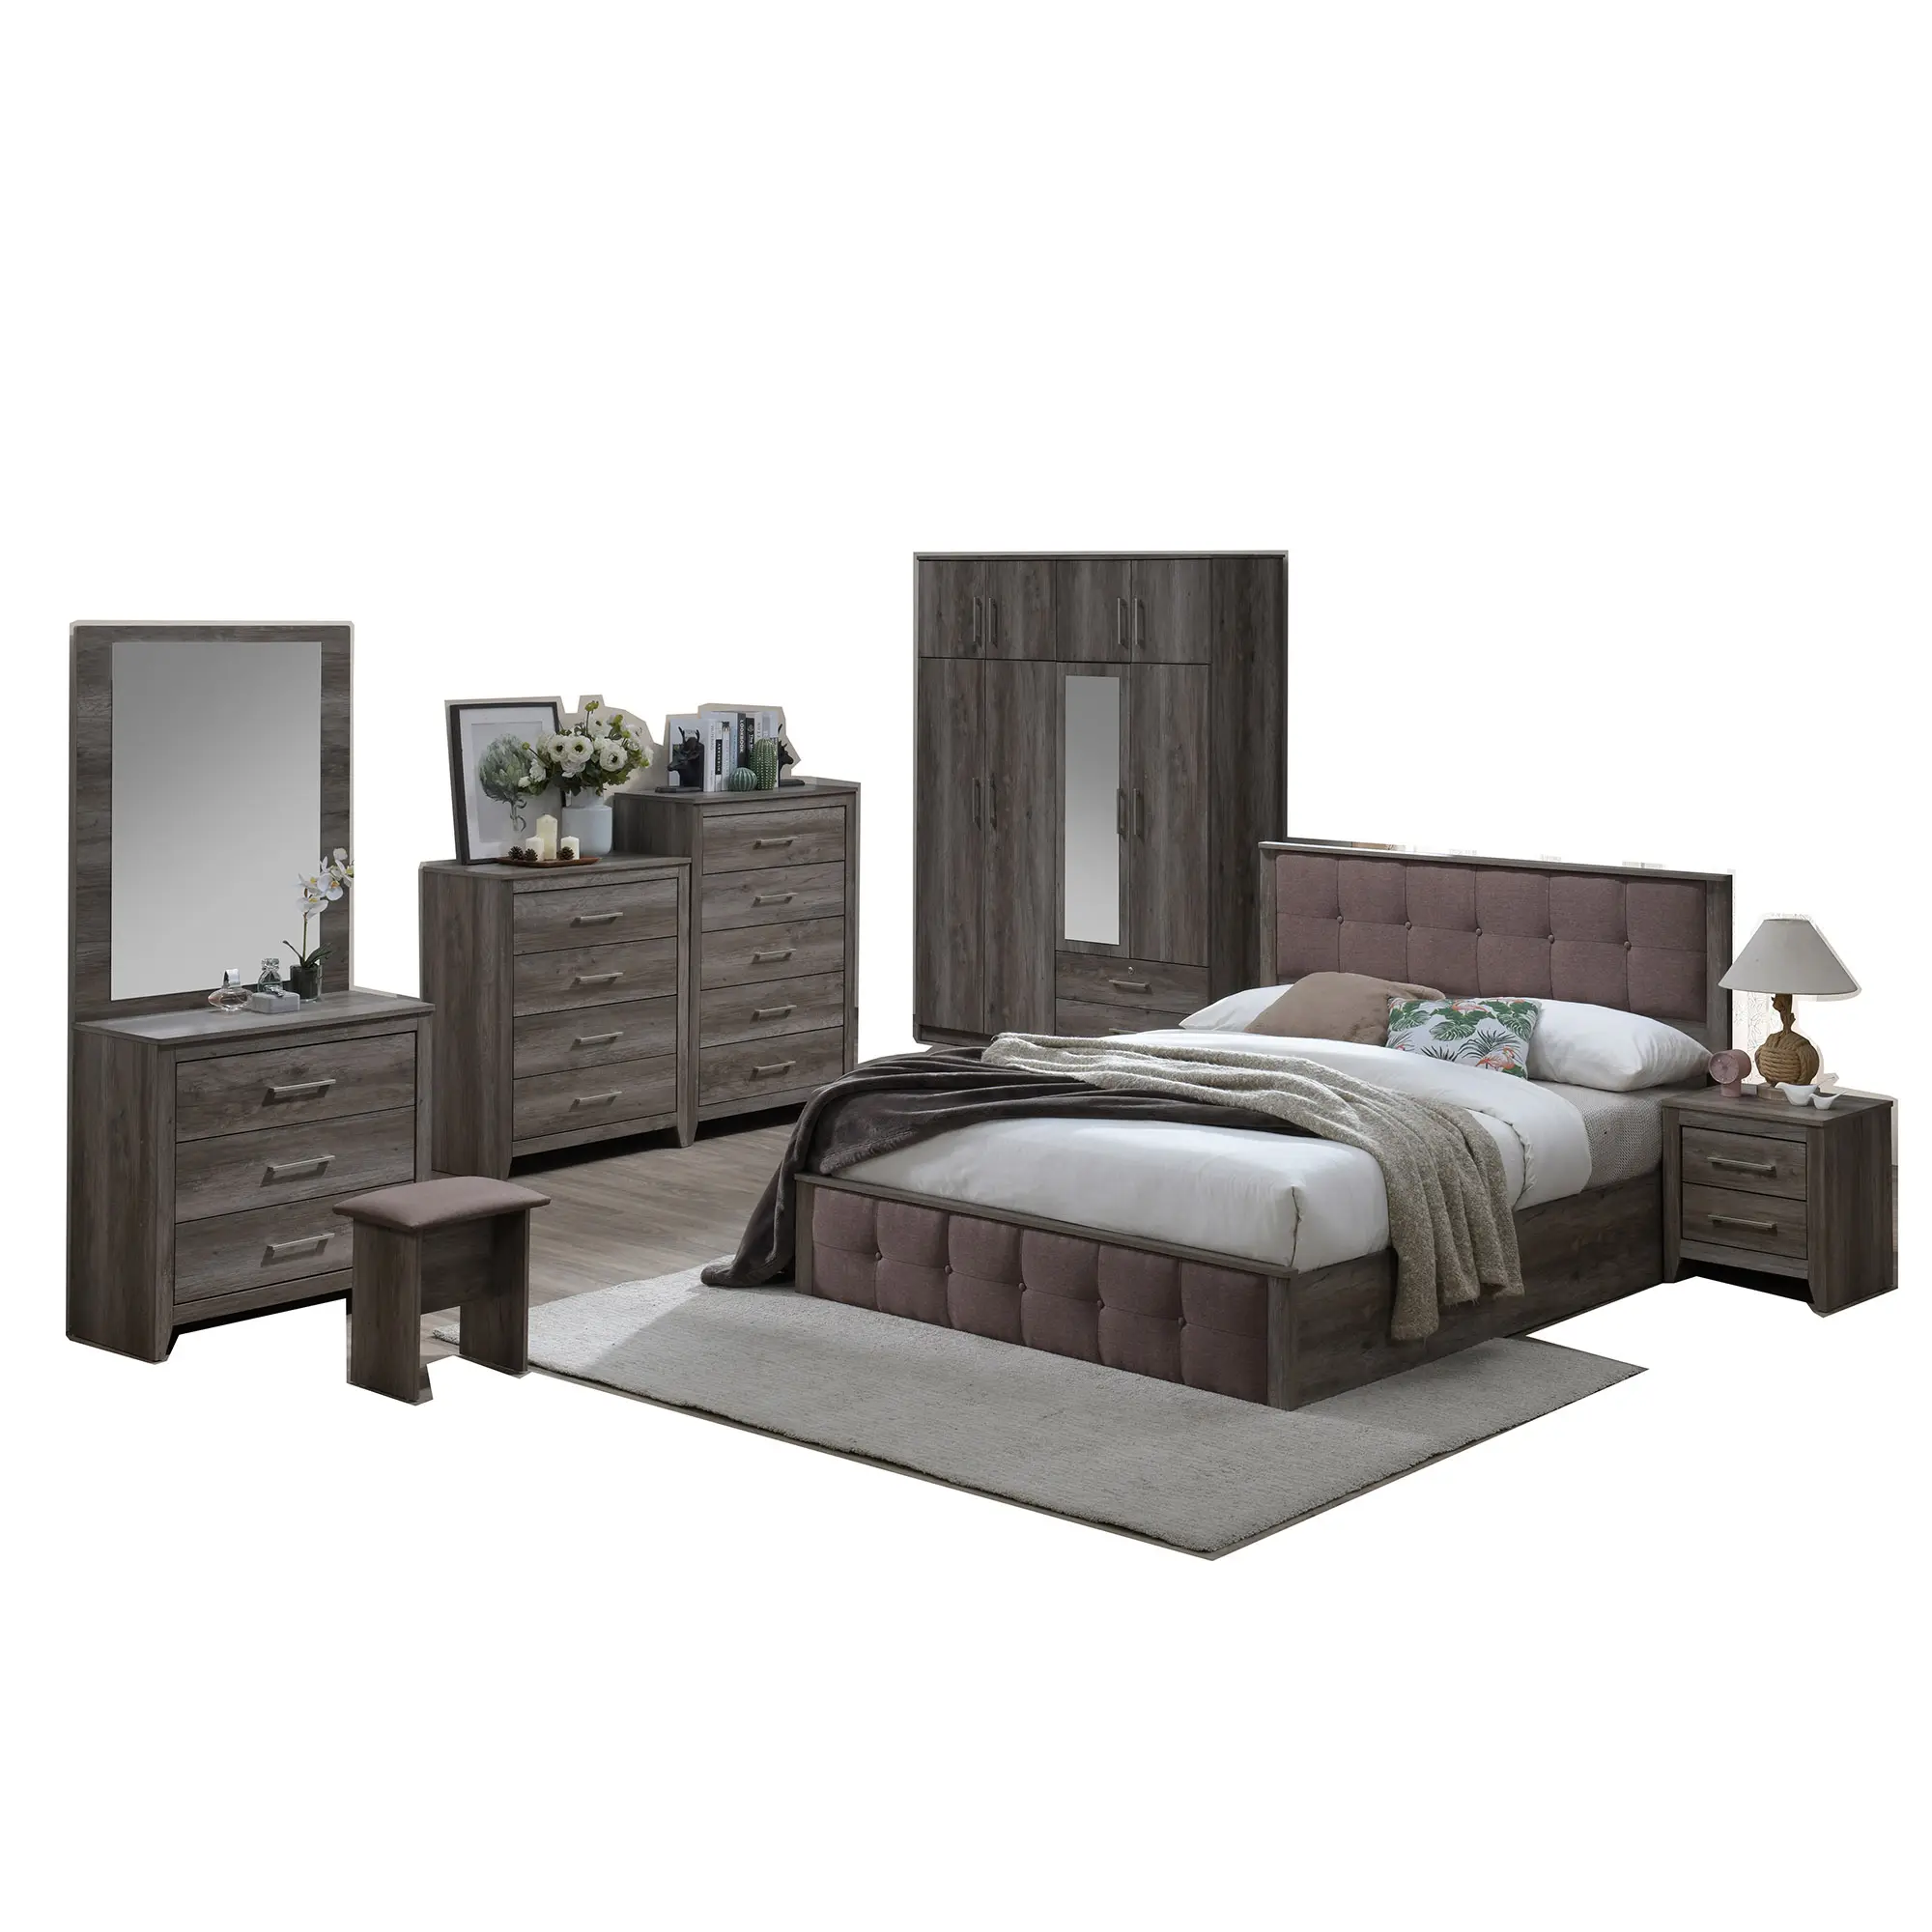 High Quality Full Bedroom Set Include Bed + Wardrobe With 7 Doors 2 Drawers + Drawers Chest x2 + Dressing Table + Side Table